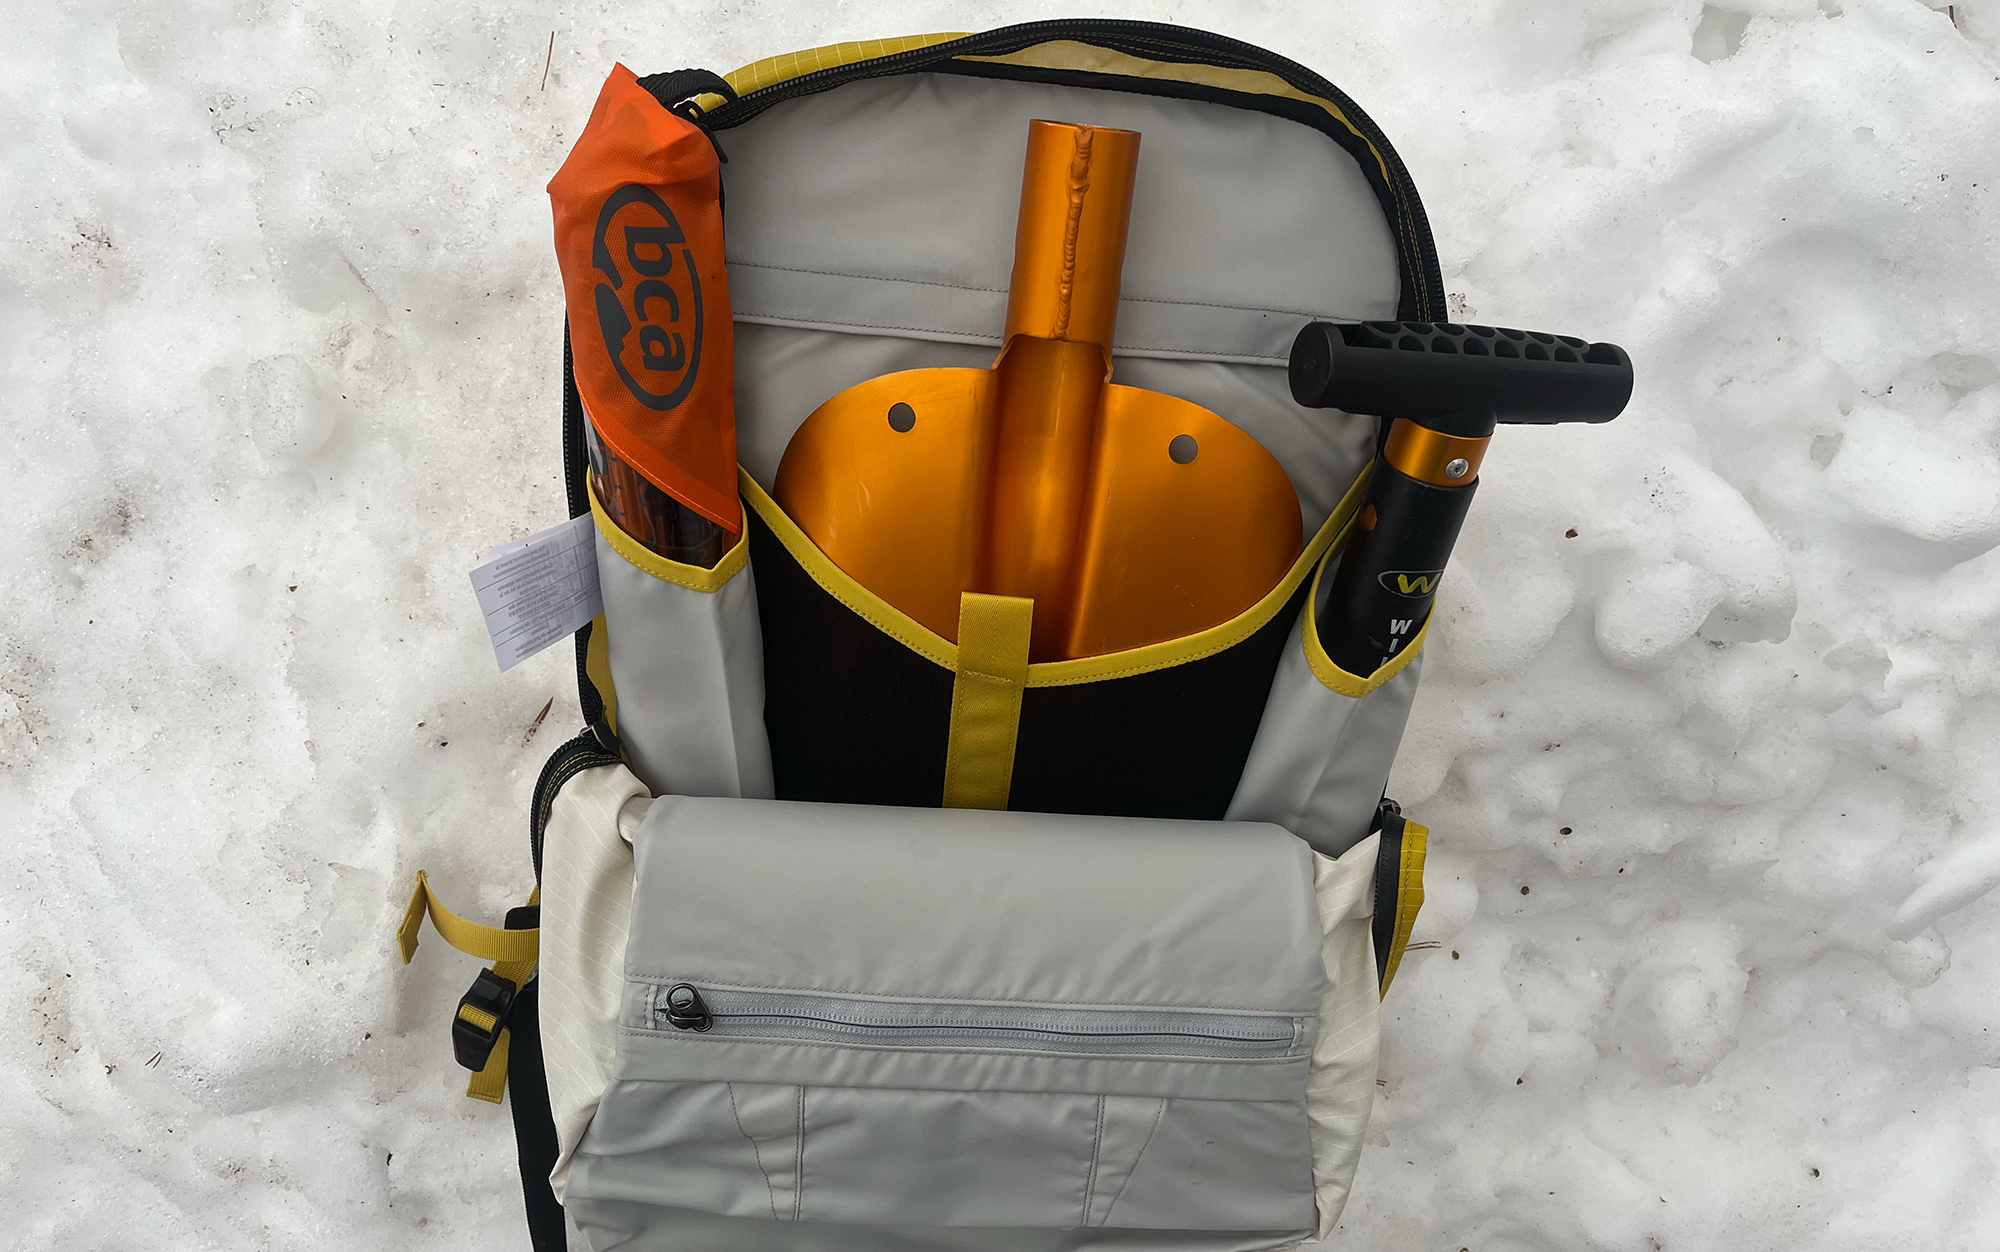 The Arc’teryx Rush SK 16 has designated pockets for avalanche safety tools.